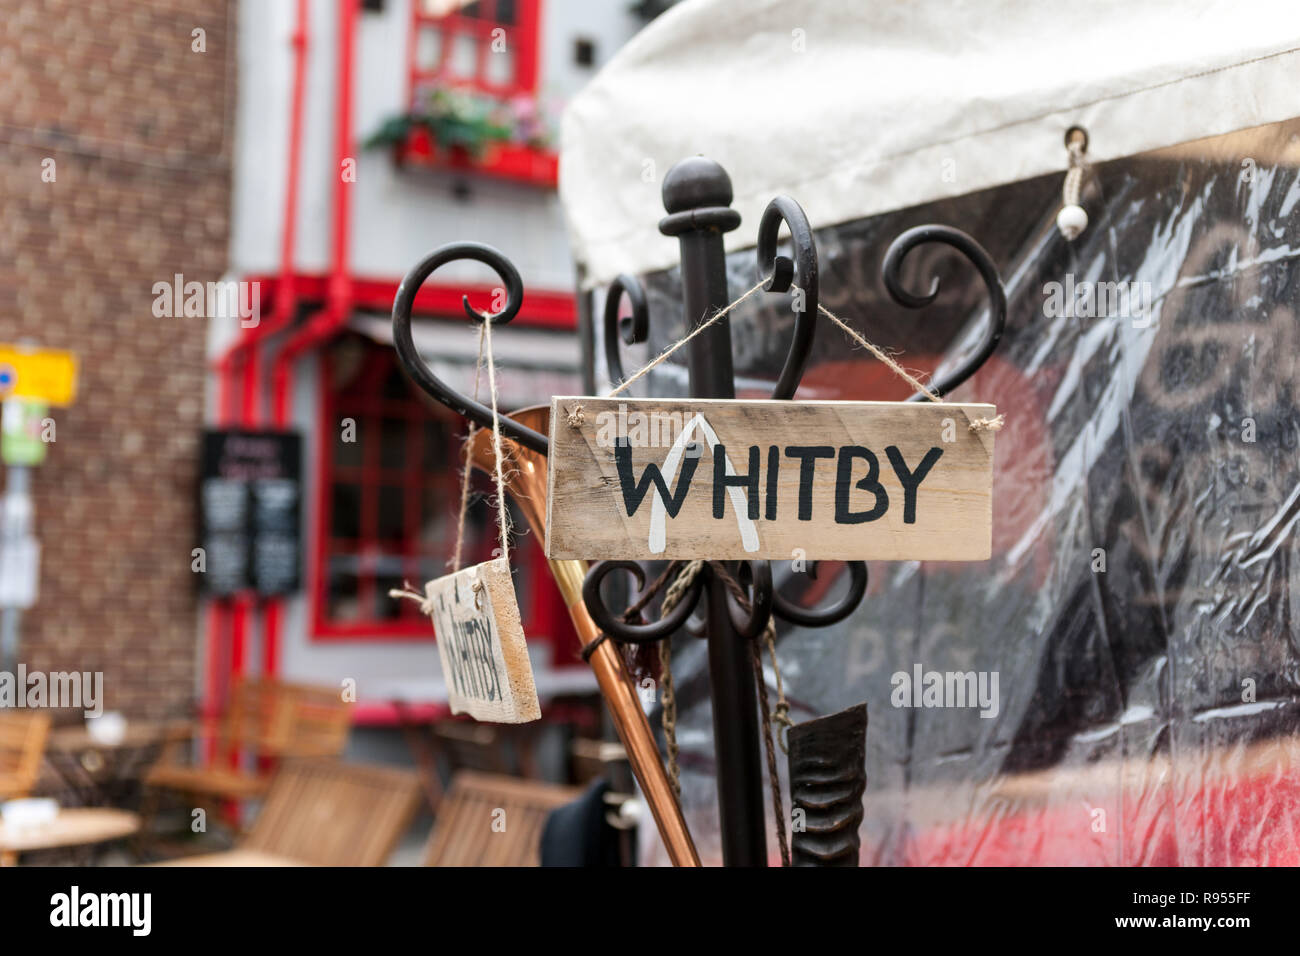 Wooden Whitby sign on coat stand Stock Photo